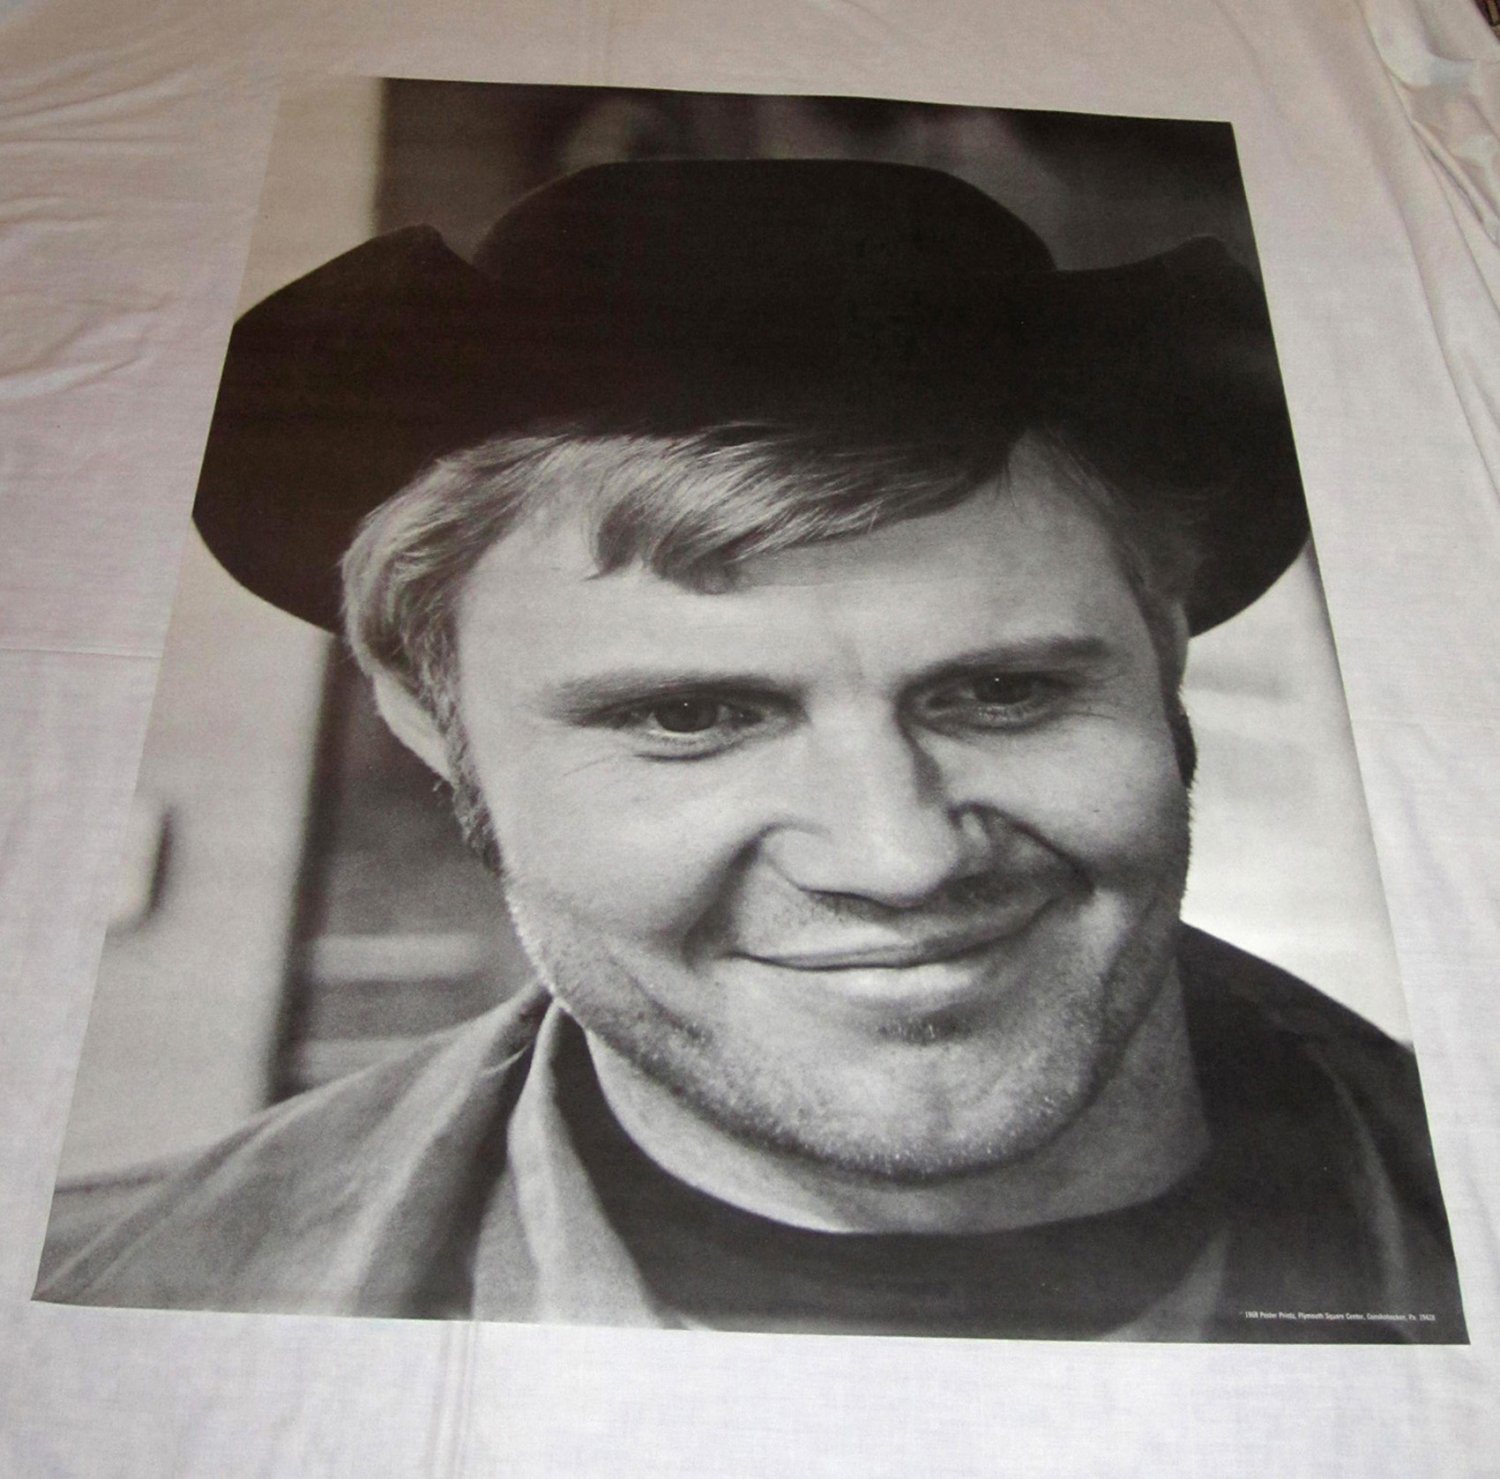 JON VOIGHT POSTER FROM 1969   VINTAGE AND RARE! MIDNIGHT COWBOY  30 BY 42 INCHES